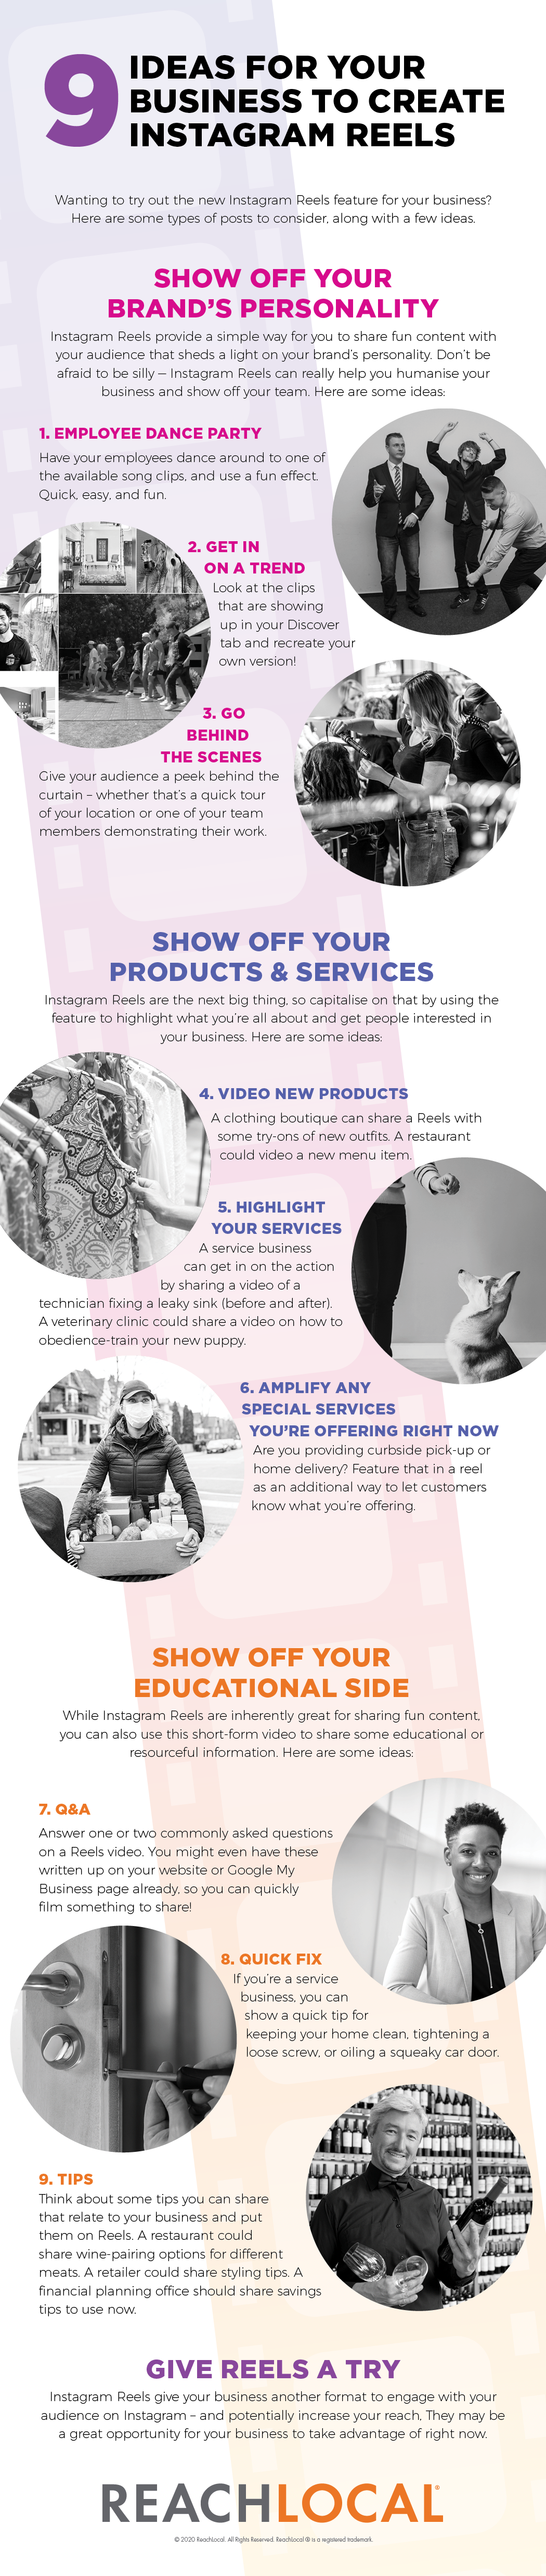 instagram reels infographic for ReachLocal by Emma Reid Design